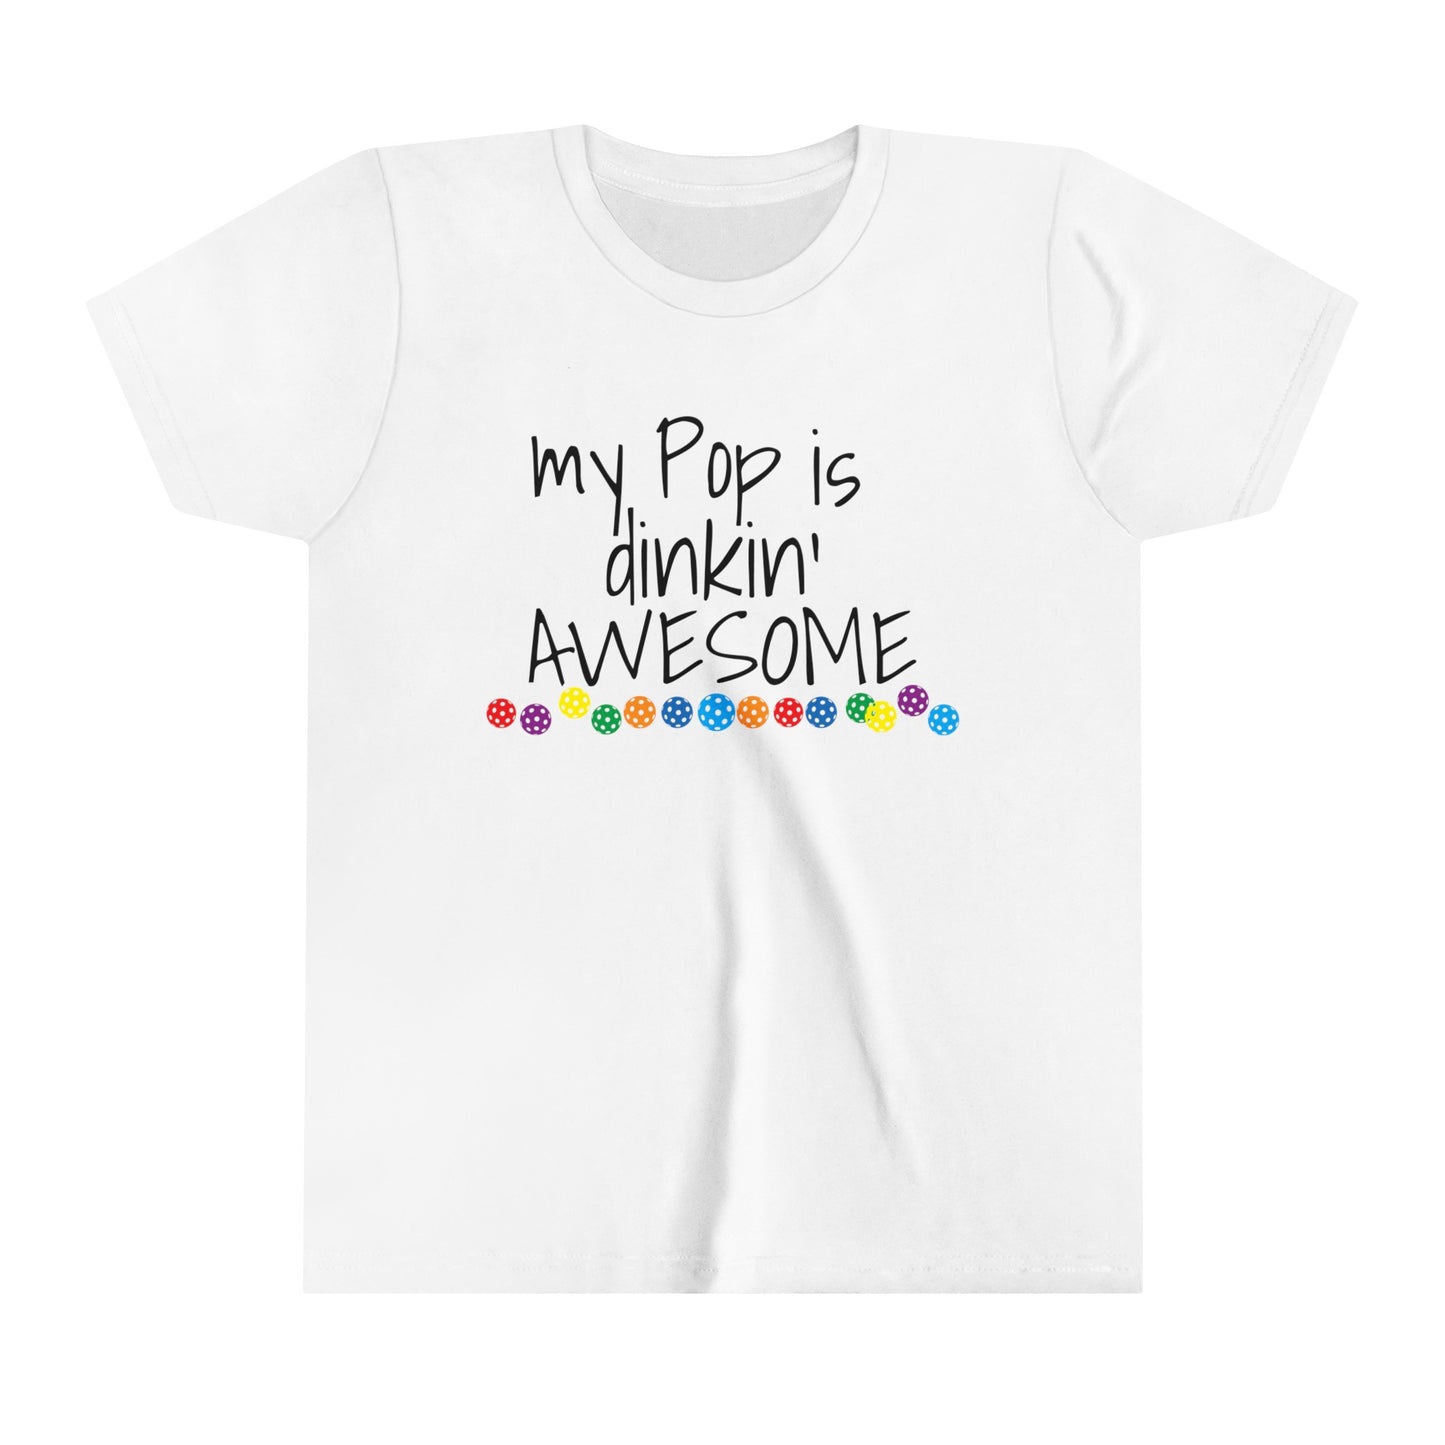 PIckleball Youth Short Sleeve Tee - my pop is dinkin awesome